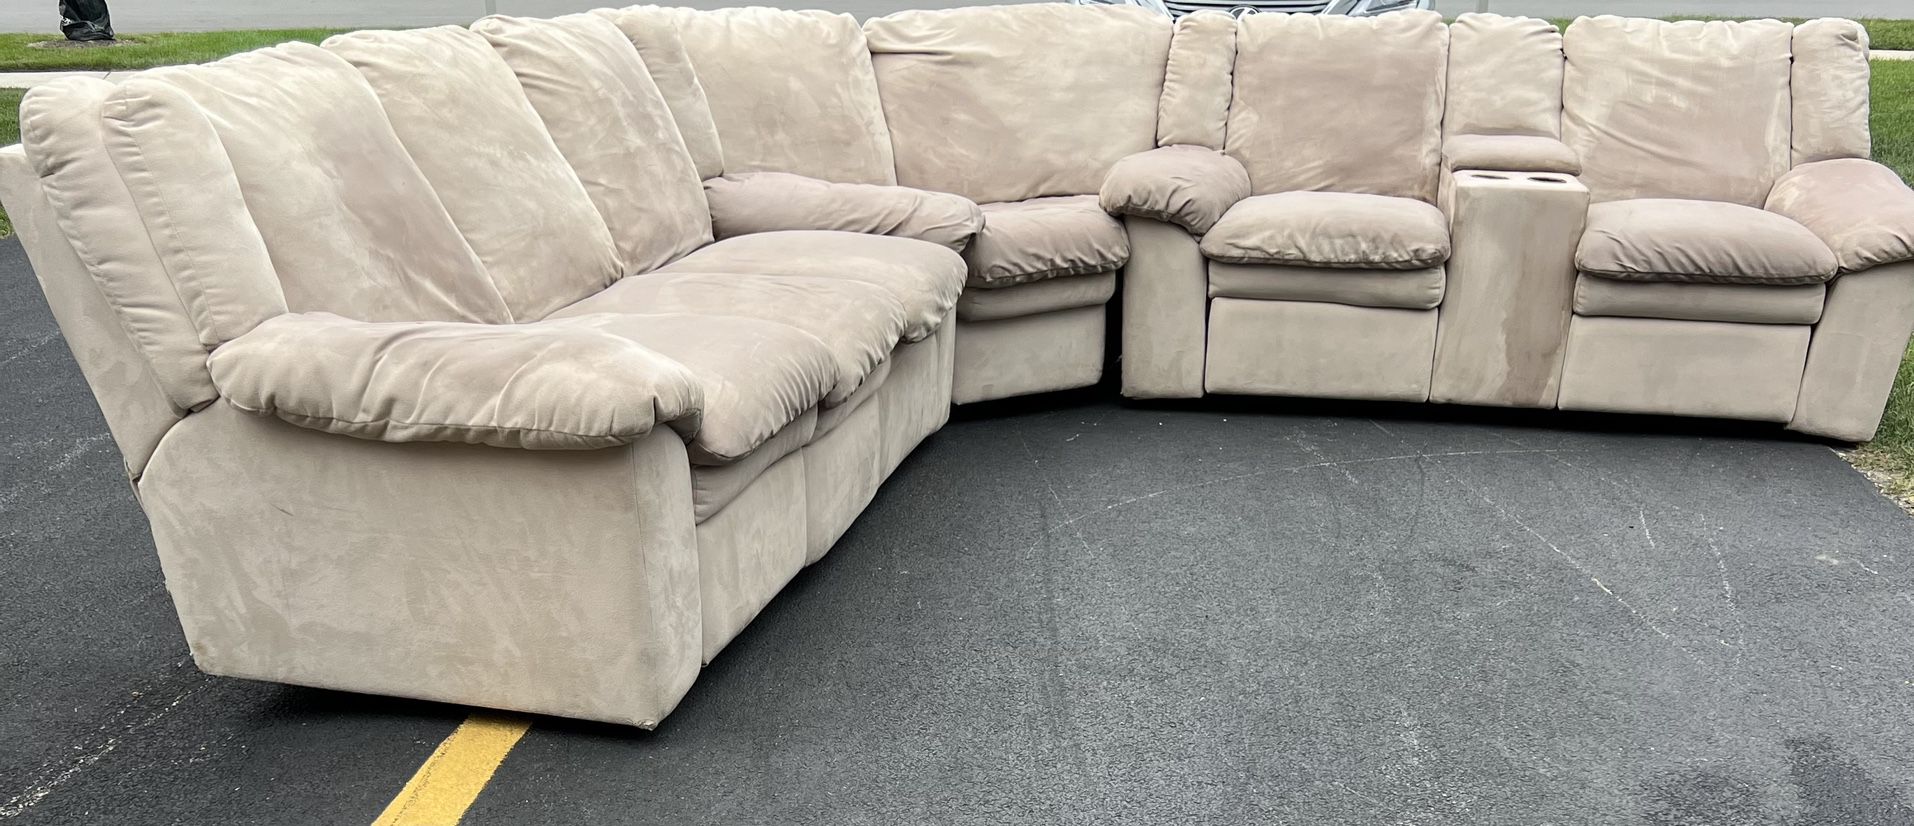 Light White/Grey Sectional Reclining Couch Set 